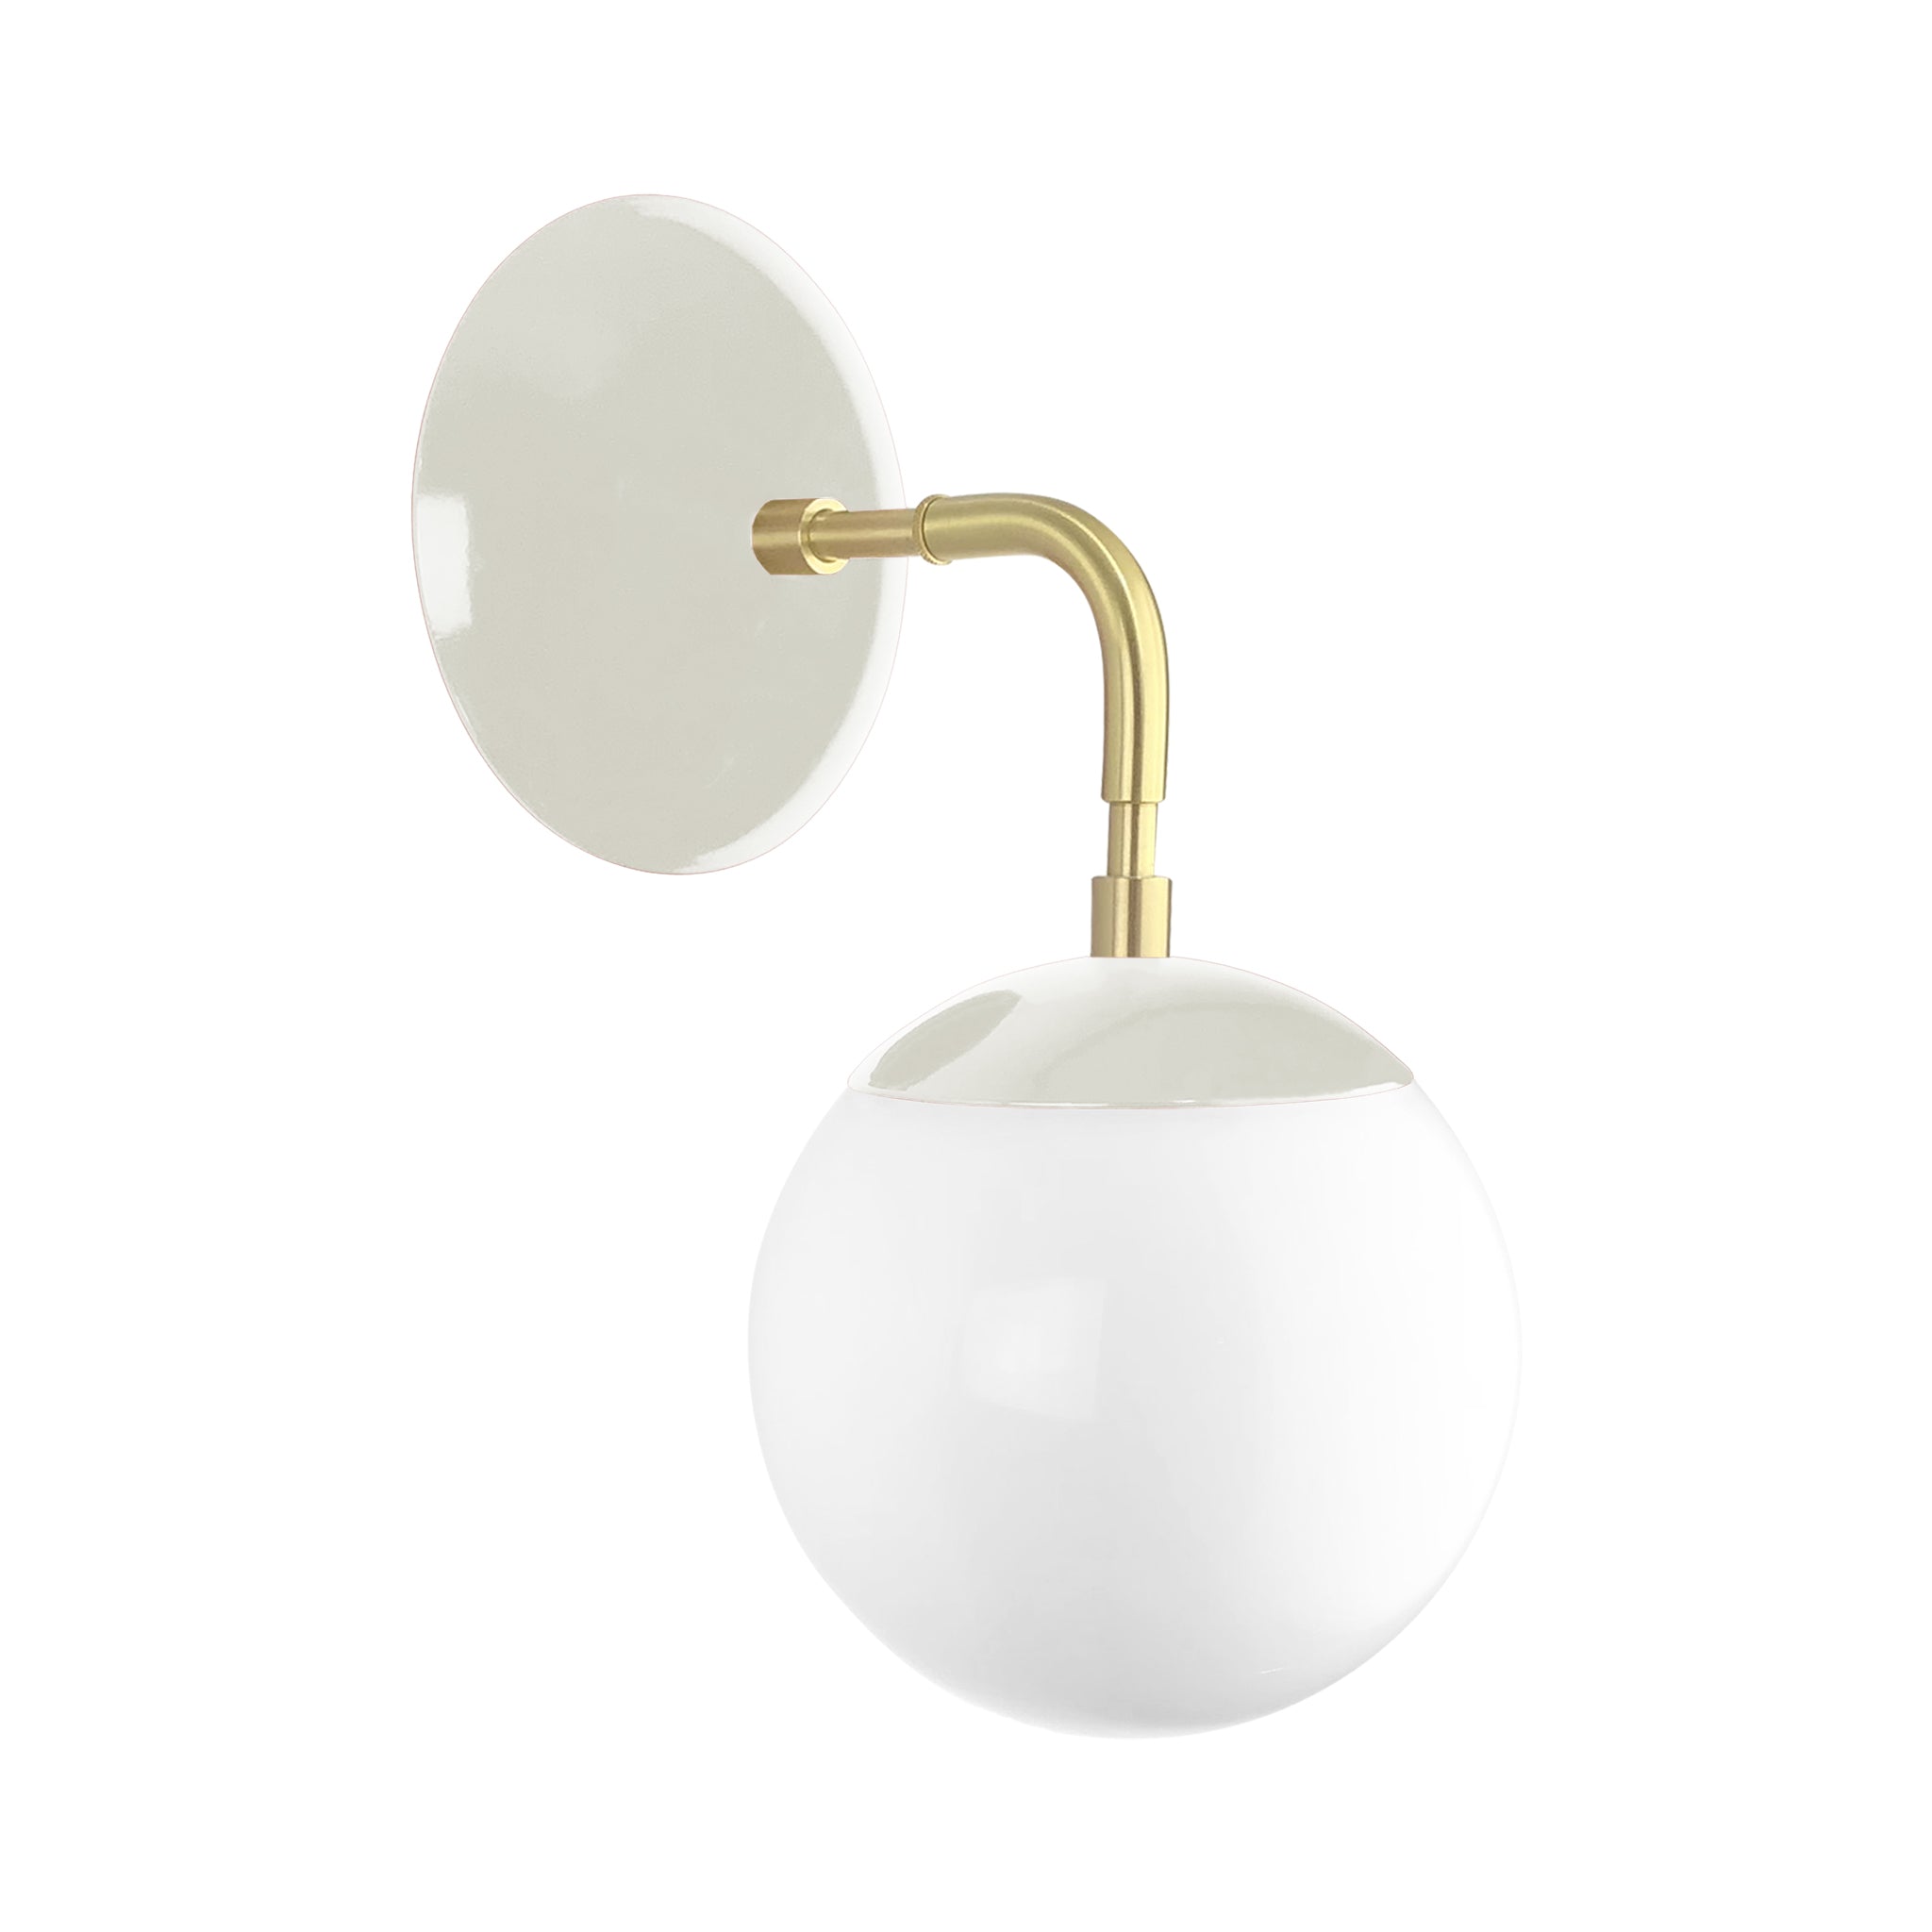 Brass and bone color Cap sconce 6" Dutton Brown lighting